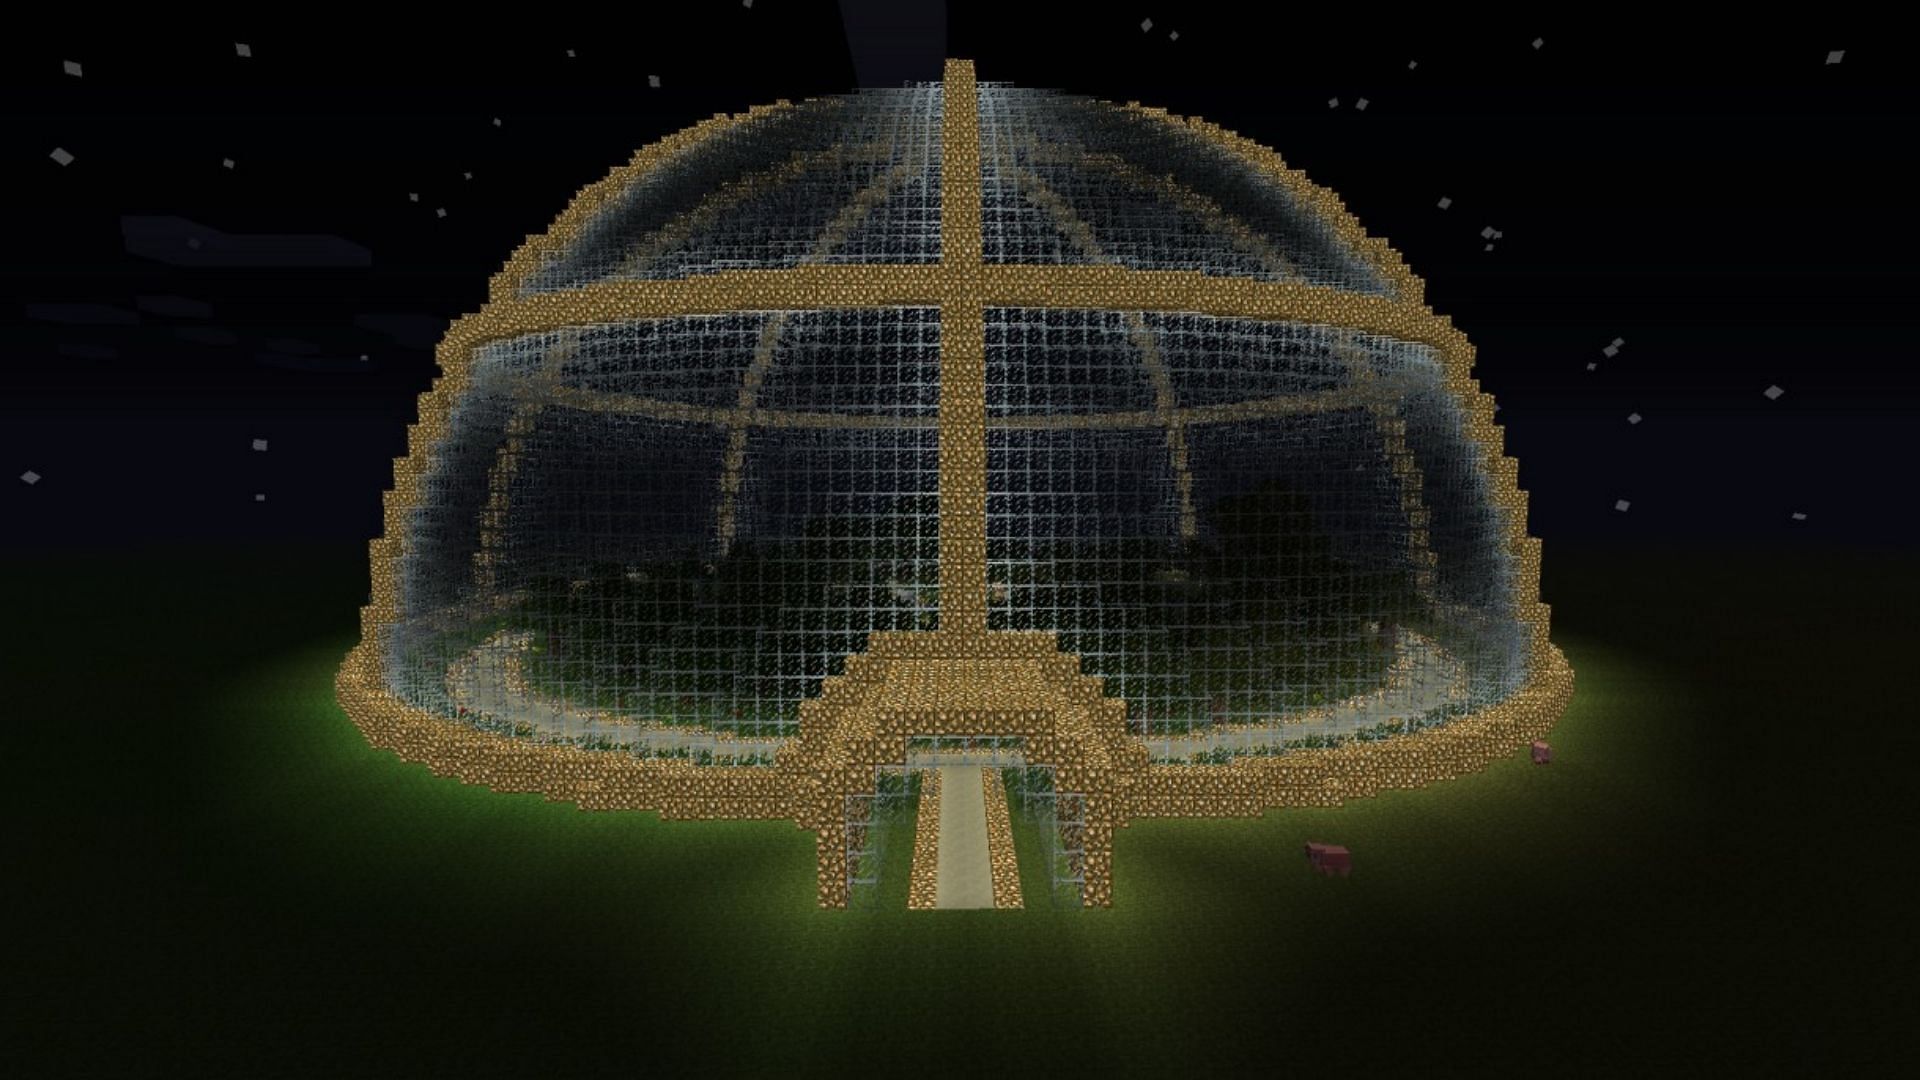 Domes are one of the most beautiful structures that players can build in Minecraft (Image via PlanetMinecraft/resupine)